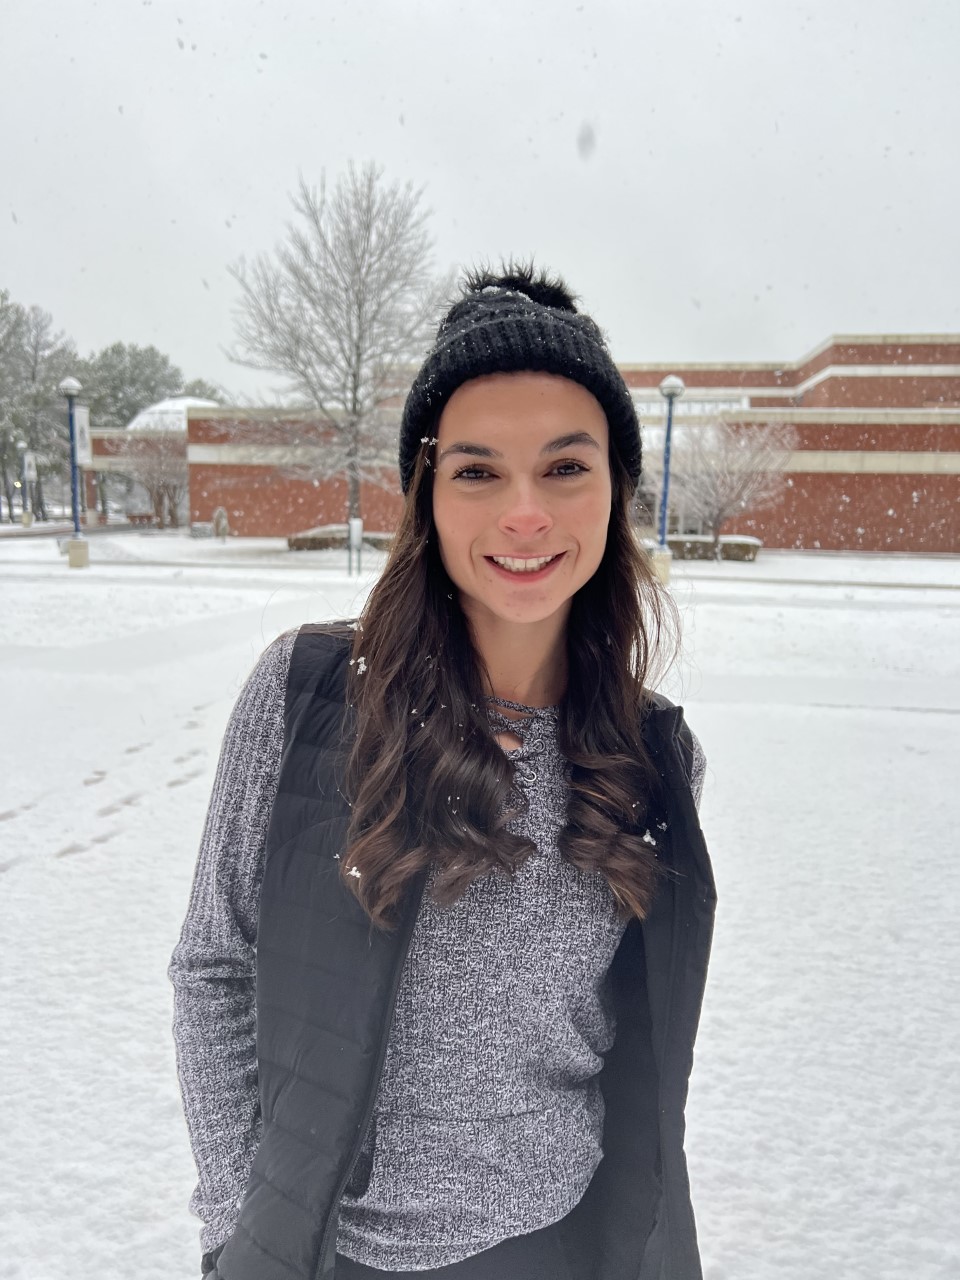 The UAFS campus is covered in snow. Isabella stands in winter clothing near the campus center. She is smiling. 